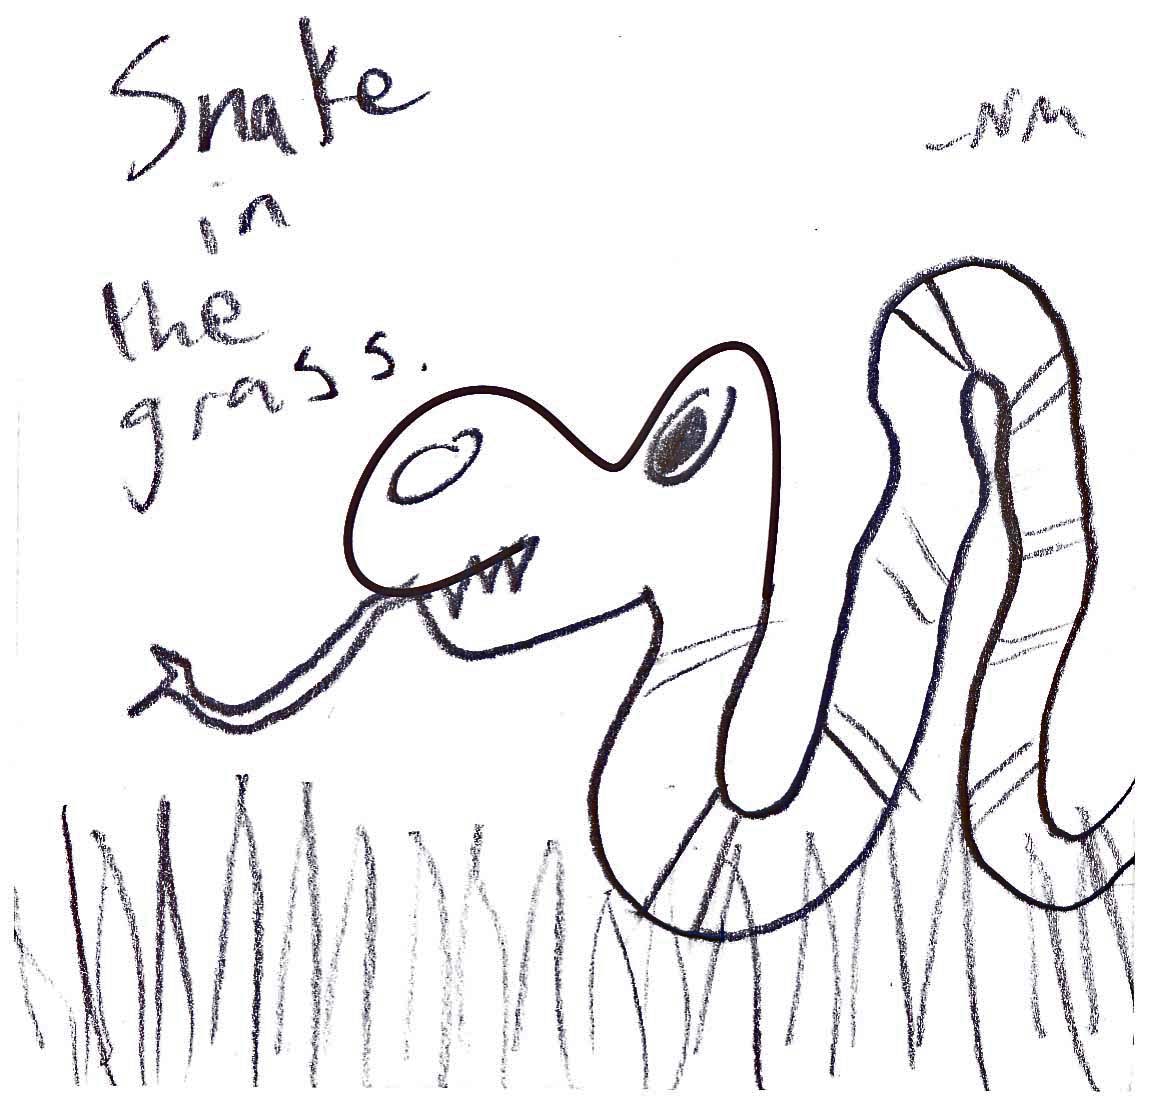 snake in the grass